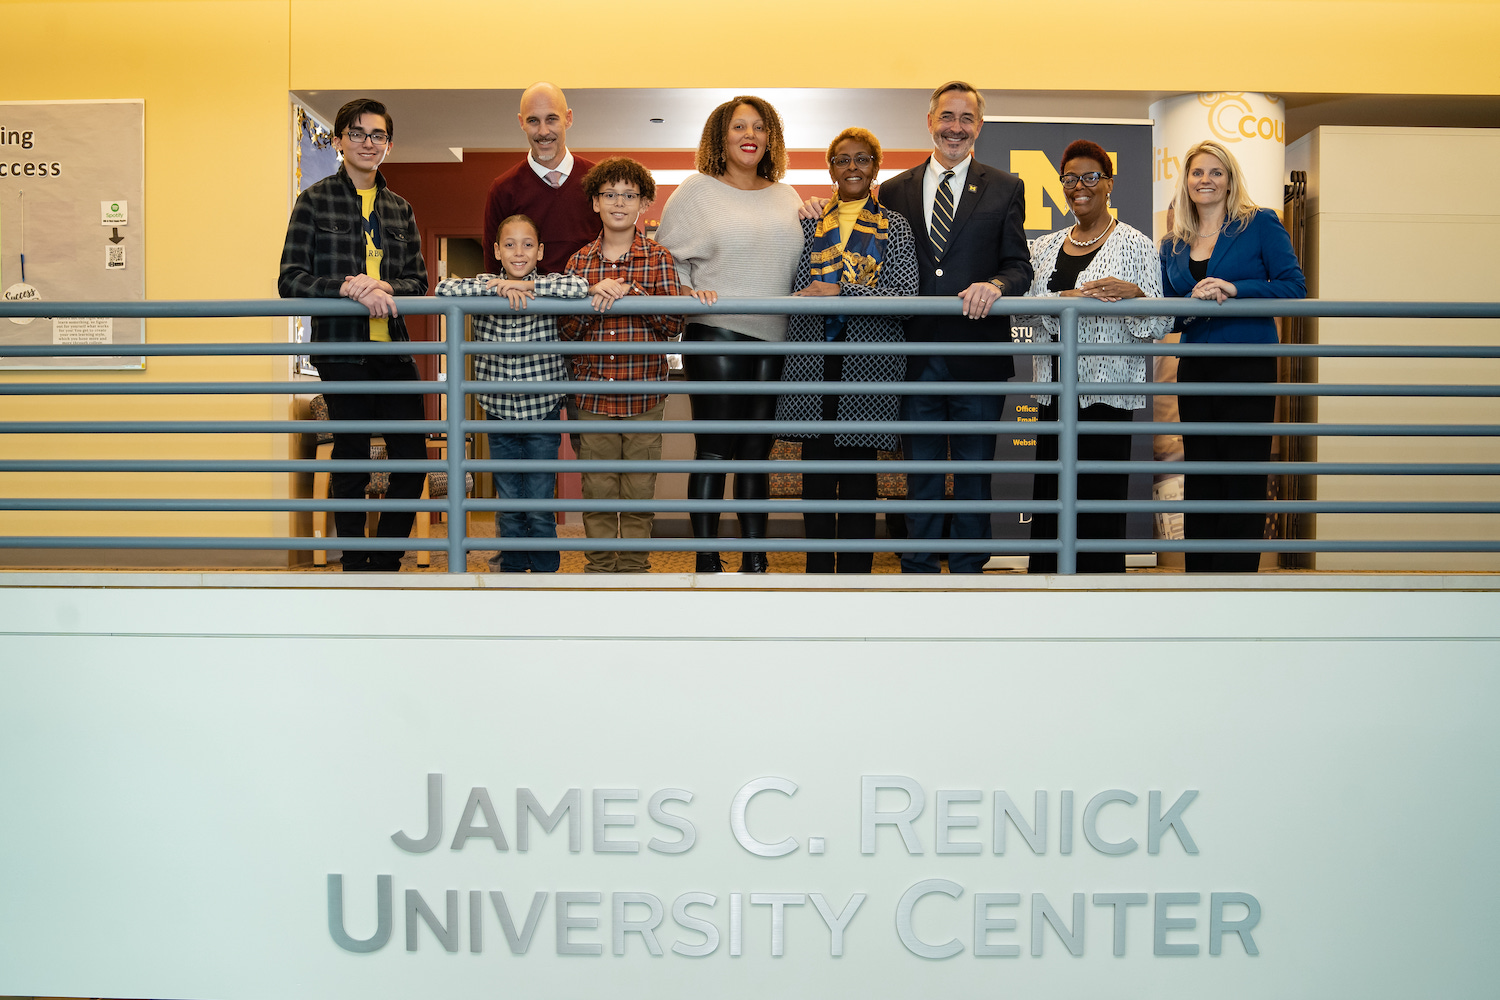 People in the UM-Dearborn gather on the balcony of the University Center over the new name plate celebrating James C. Renick